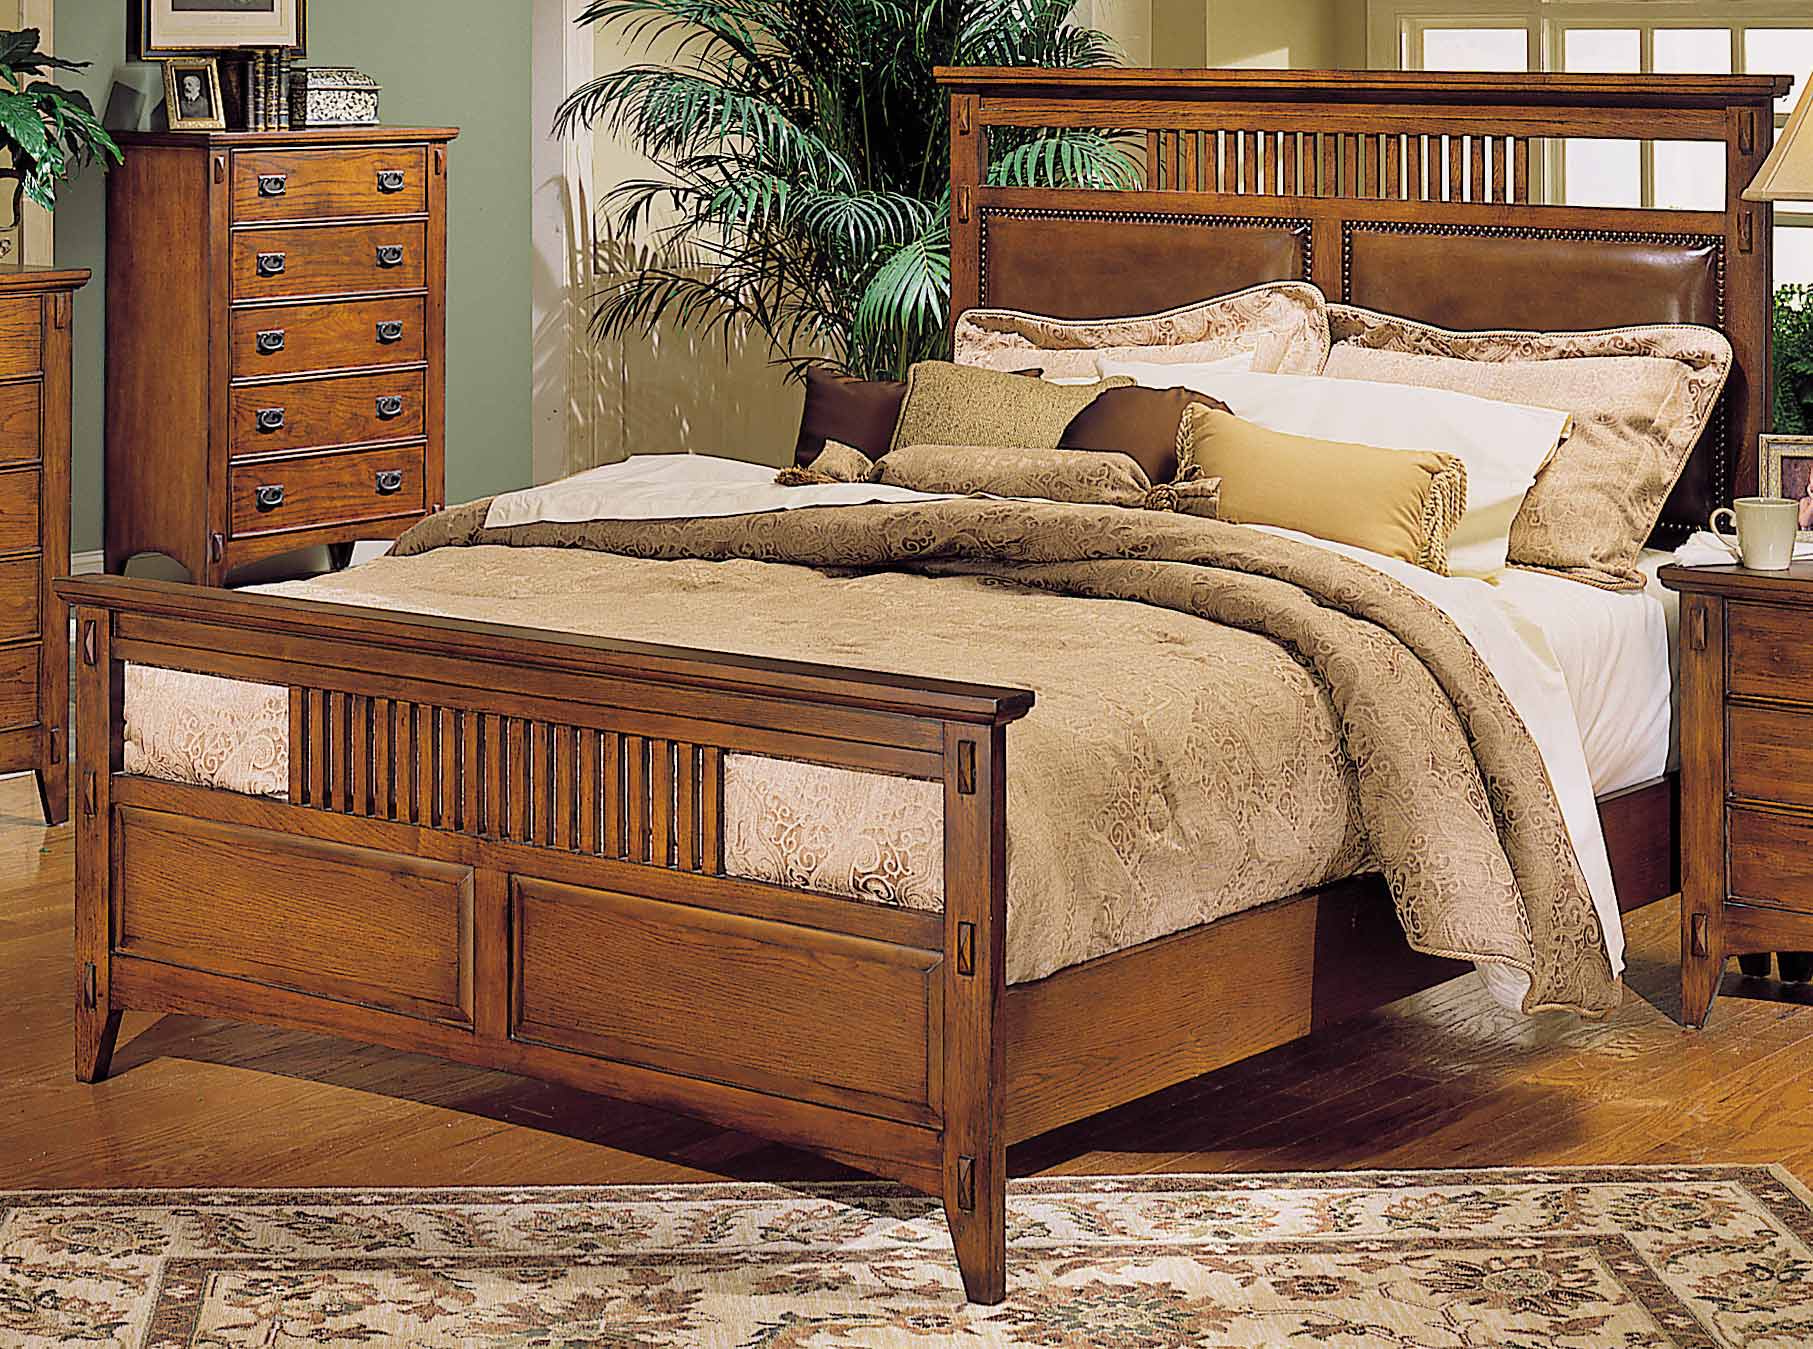 arts and crafts bedroom furniture for sale